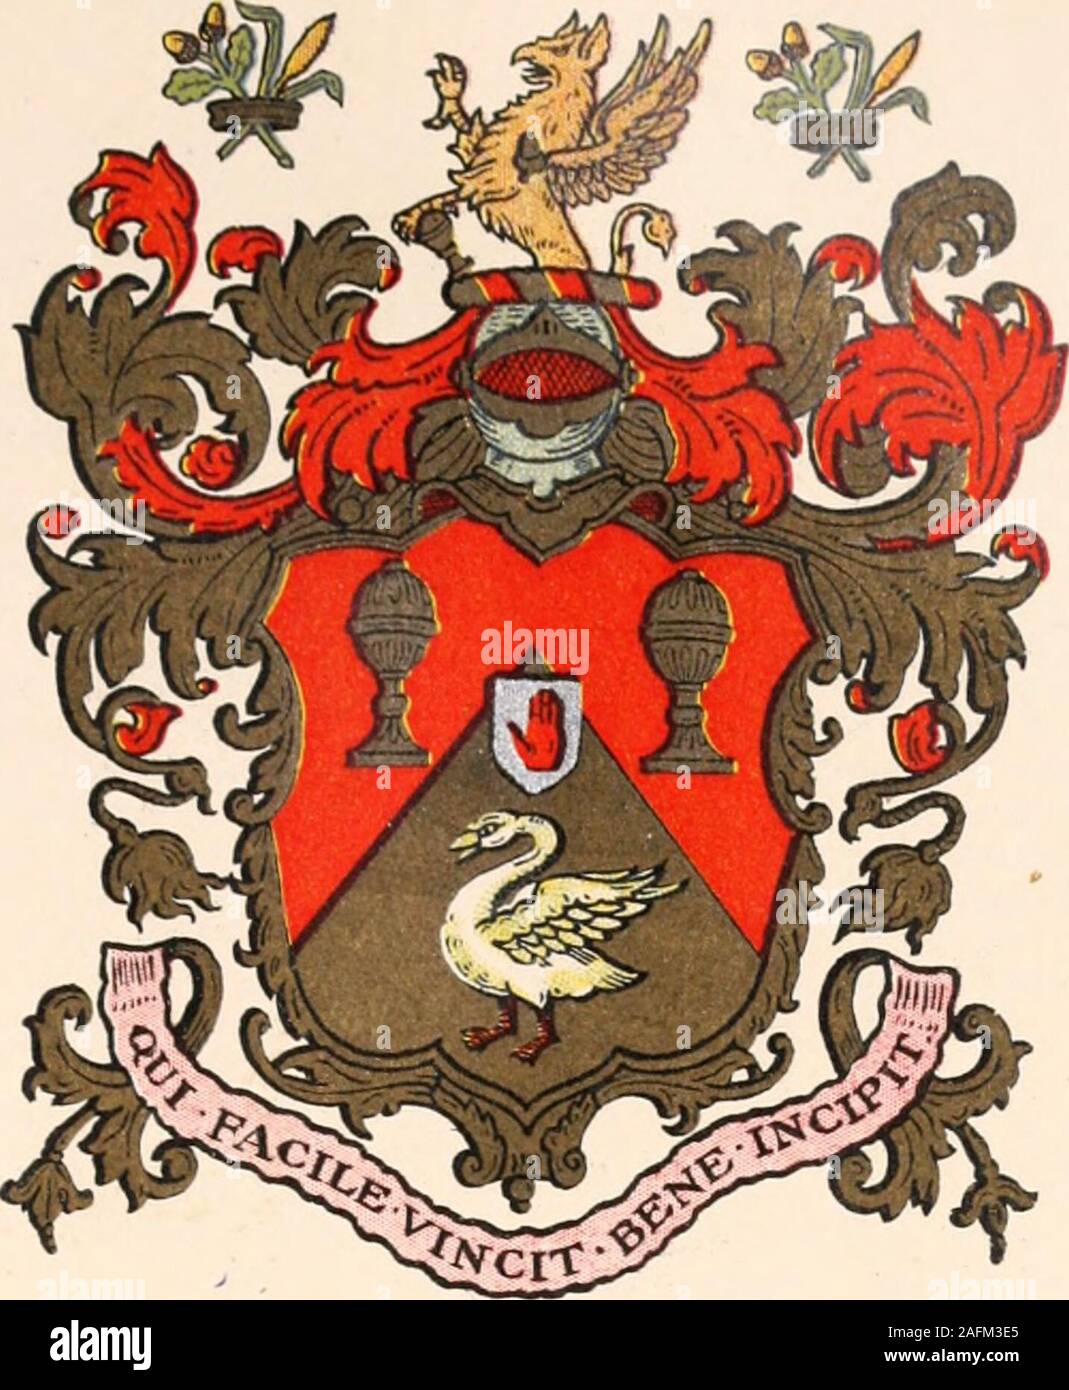 . Armorial families : a directory of gentlemen of coat-armour. 101 Thirlestone Road, West Nor-wood), d. of George Clements of Nottingham :—John Villiers Barrett-Lennard, Gentleman, b. 1889. Res.—Canada. Richard Barrett-Lennard, Gentleman, /. 1892 ; tn. 1917,Kathleen, d. of Alfred Blake, of Duxmoor, Ross, co. Here-ford. Res.— BARRIE (H.Coll., 20 Aug. 1913). Barry of six argentand gules,in chief a lion passant guardant counterchanged,and issuing from the base reeds proper. Mantlinggules and argent. Crest—On a wreath of the colours,an open book, amid reeds proper. Motto— Amour dela bont.^. Son ot Stock Photo